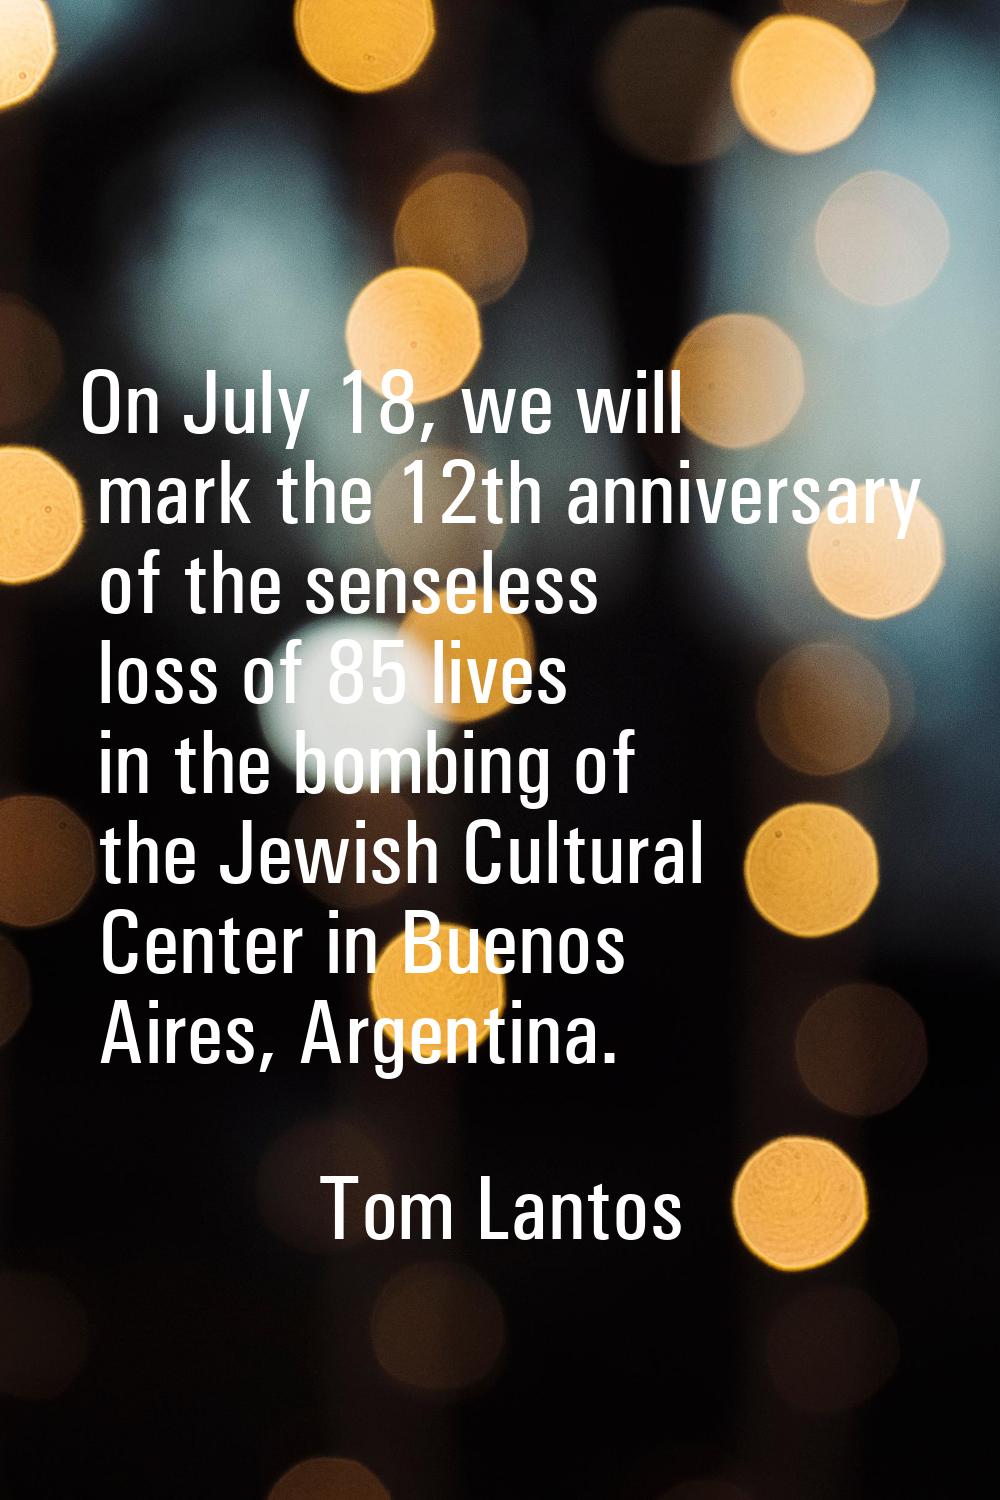 On July 18, we will mark the 12th anniversary of the senseless loss of 85 lives in the bombing of t